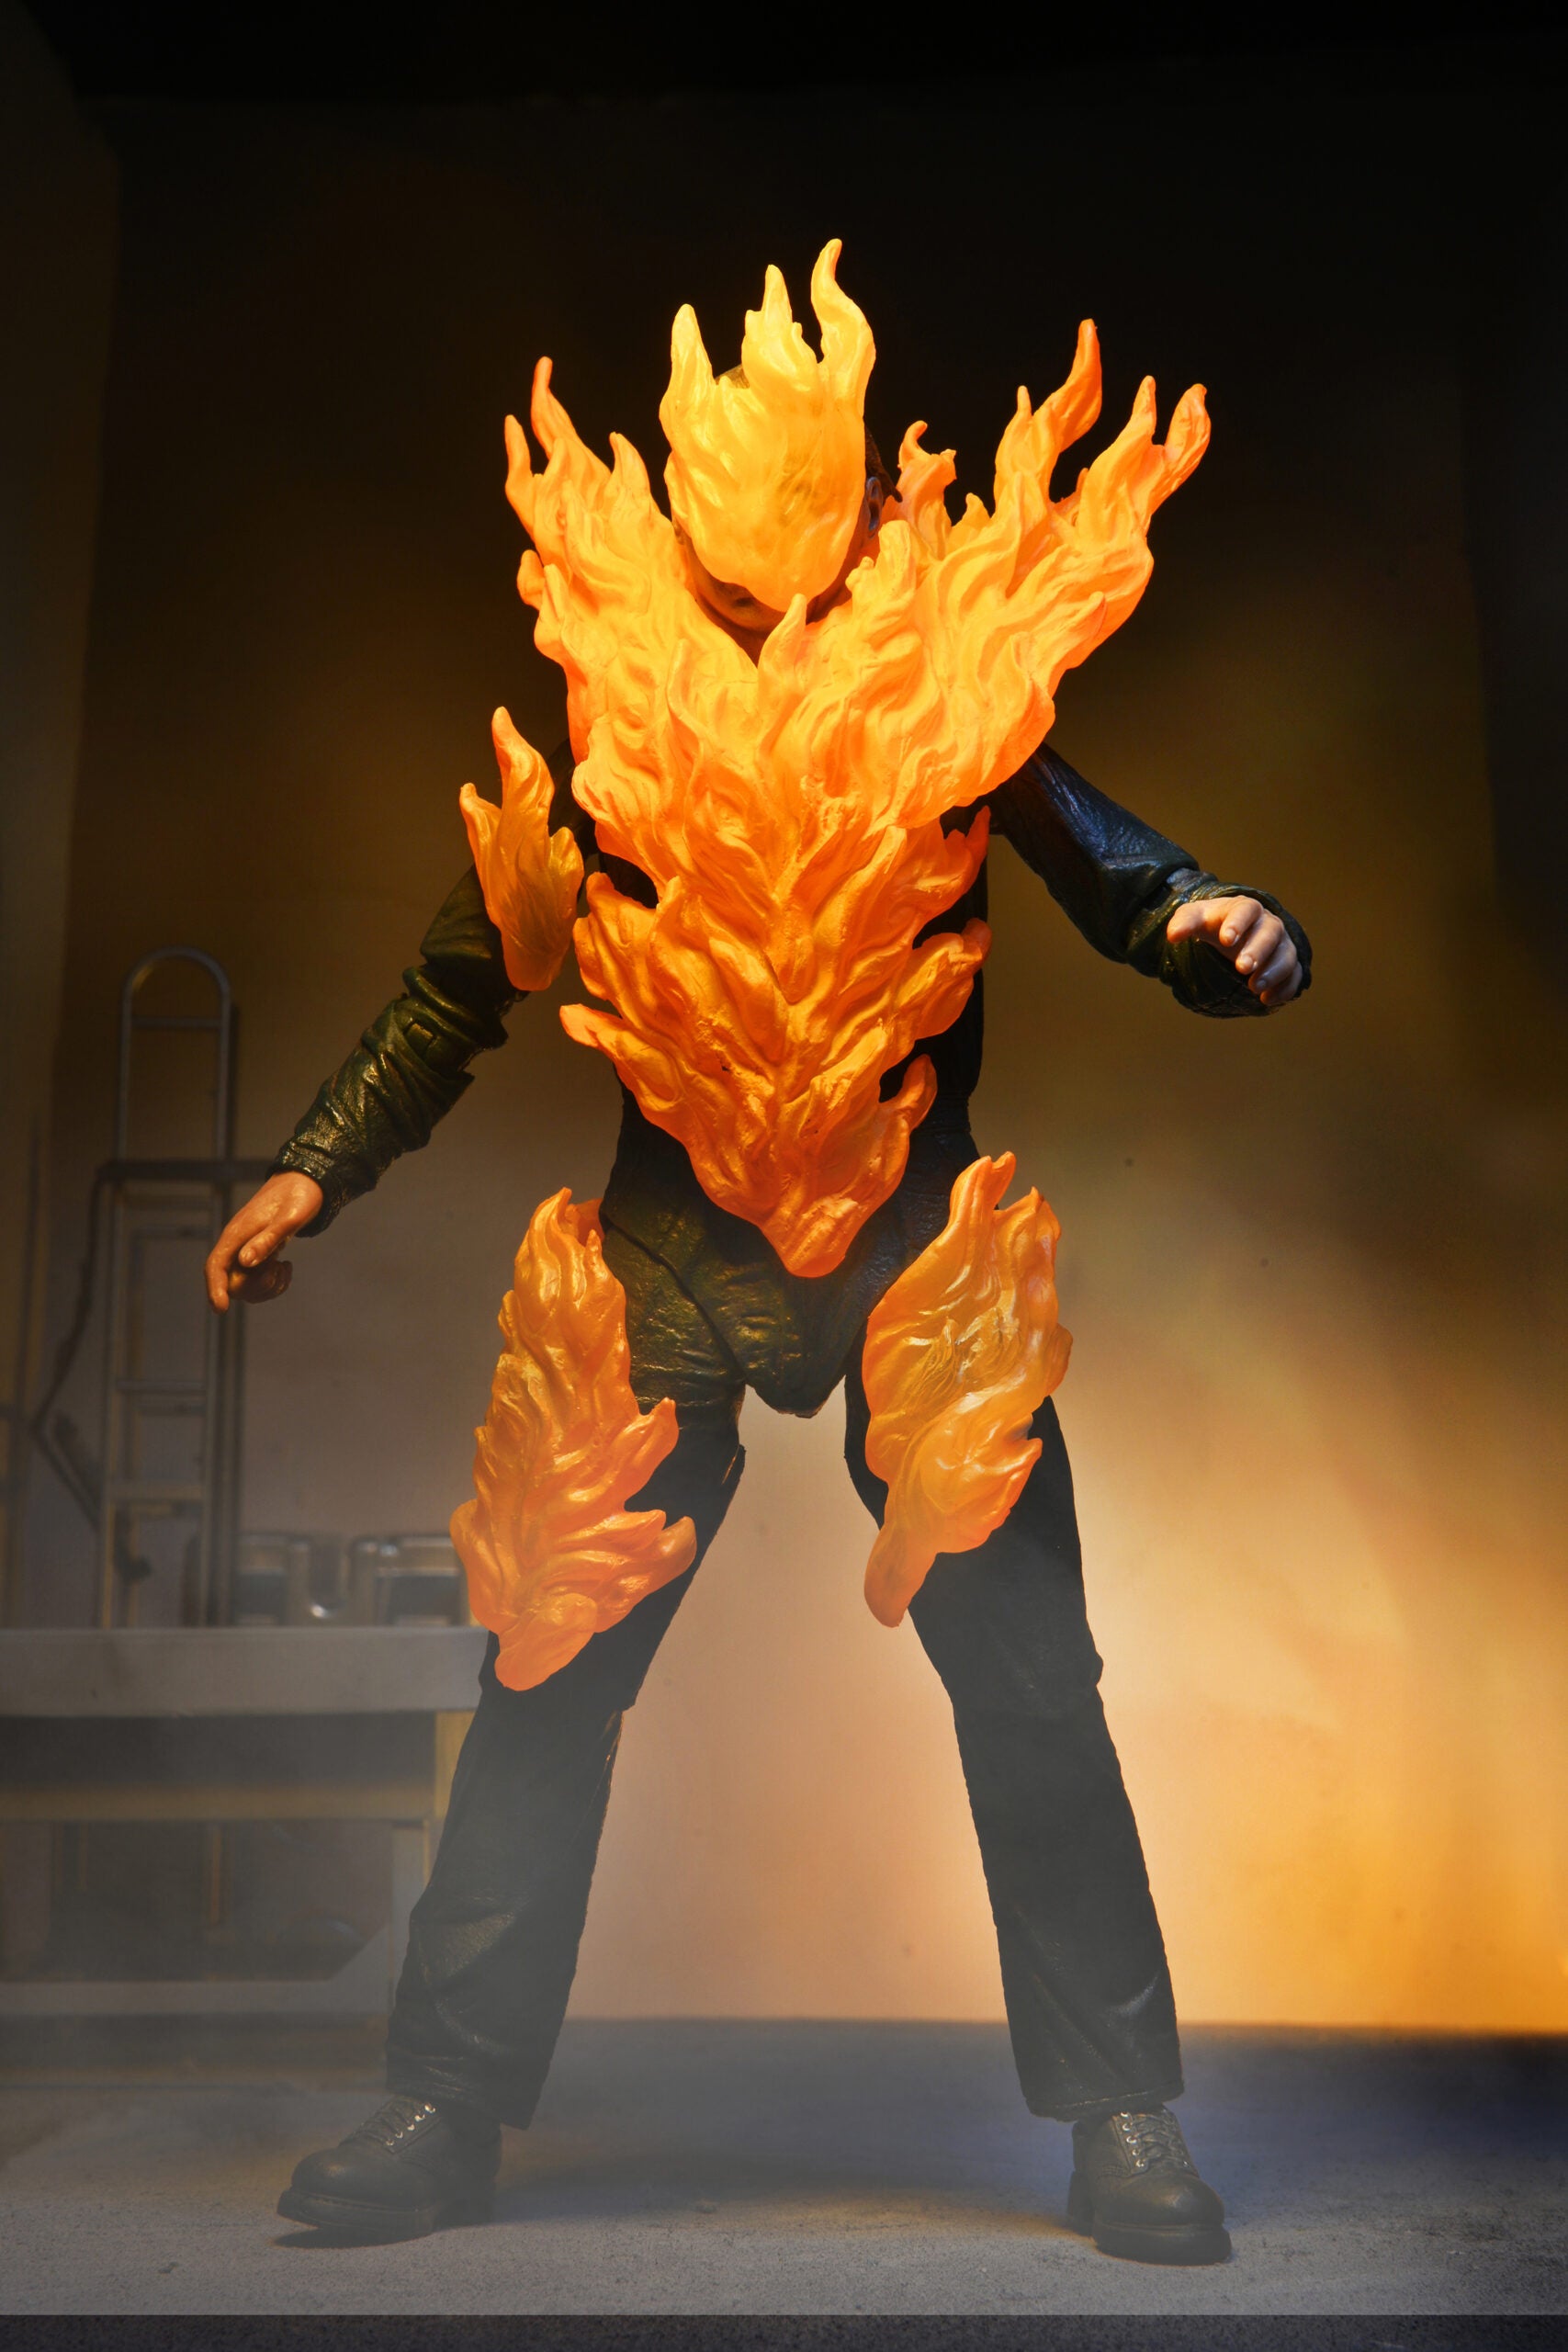 This is a NECA Halloween 2 Michael Myers and Loomis action figure set and Michael has a white mask, brown hair, green coveralls and is on fire.